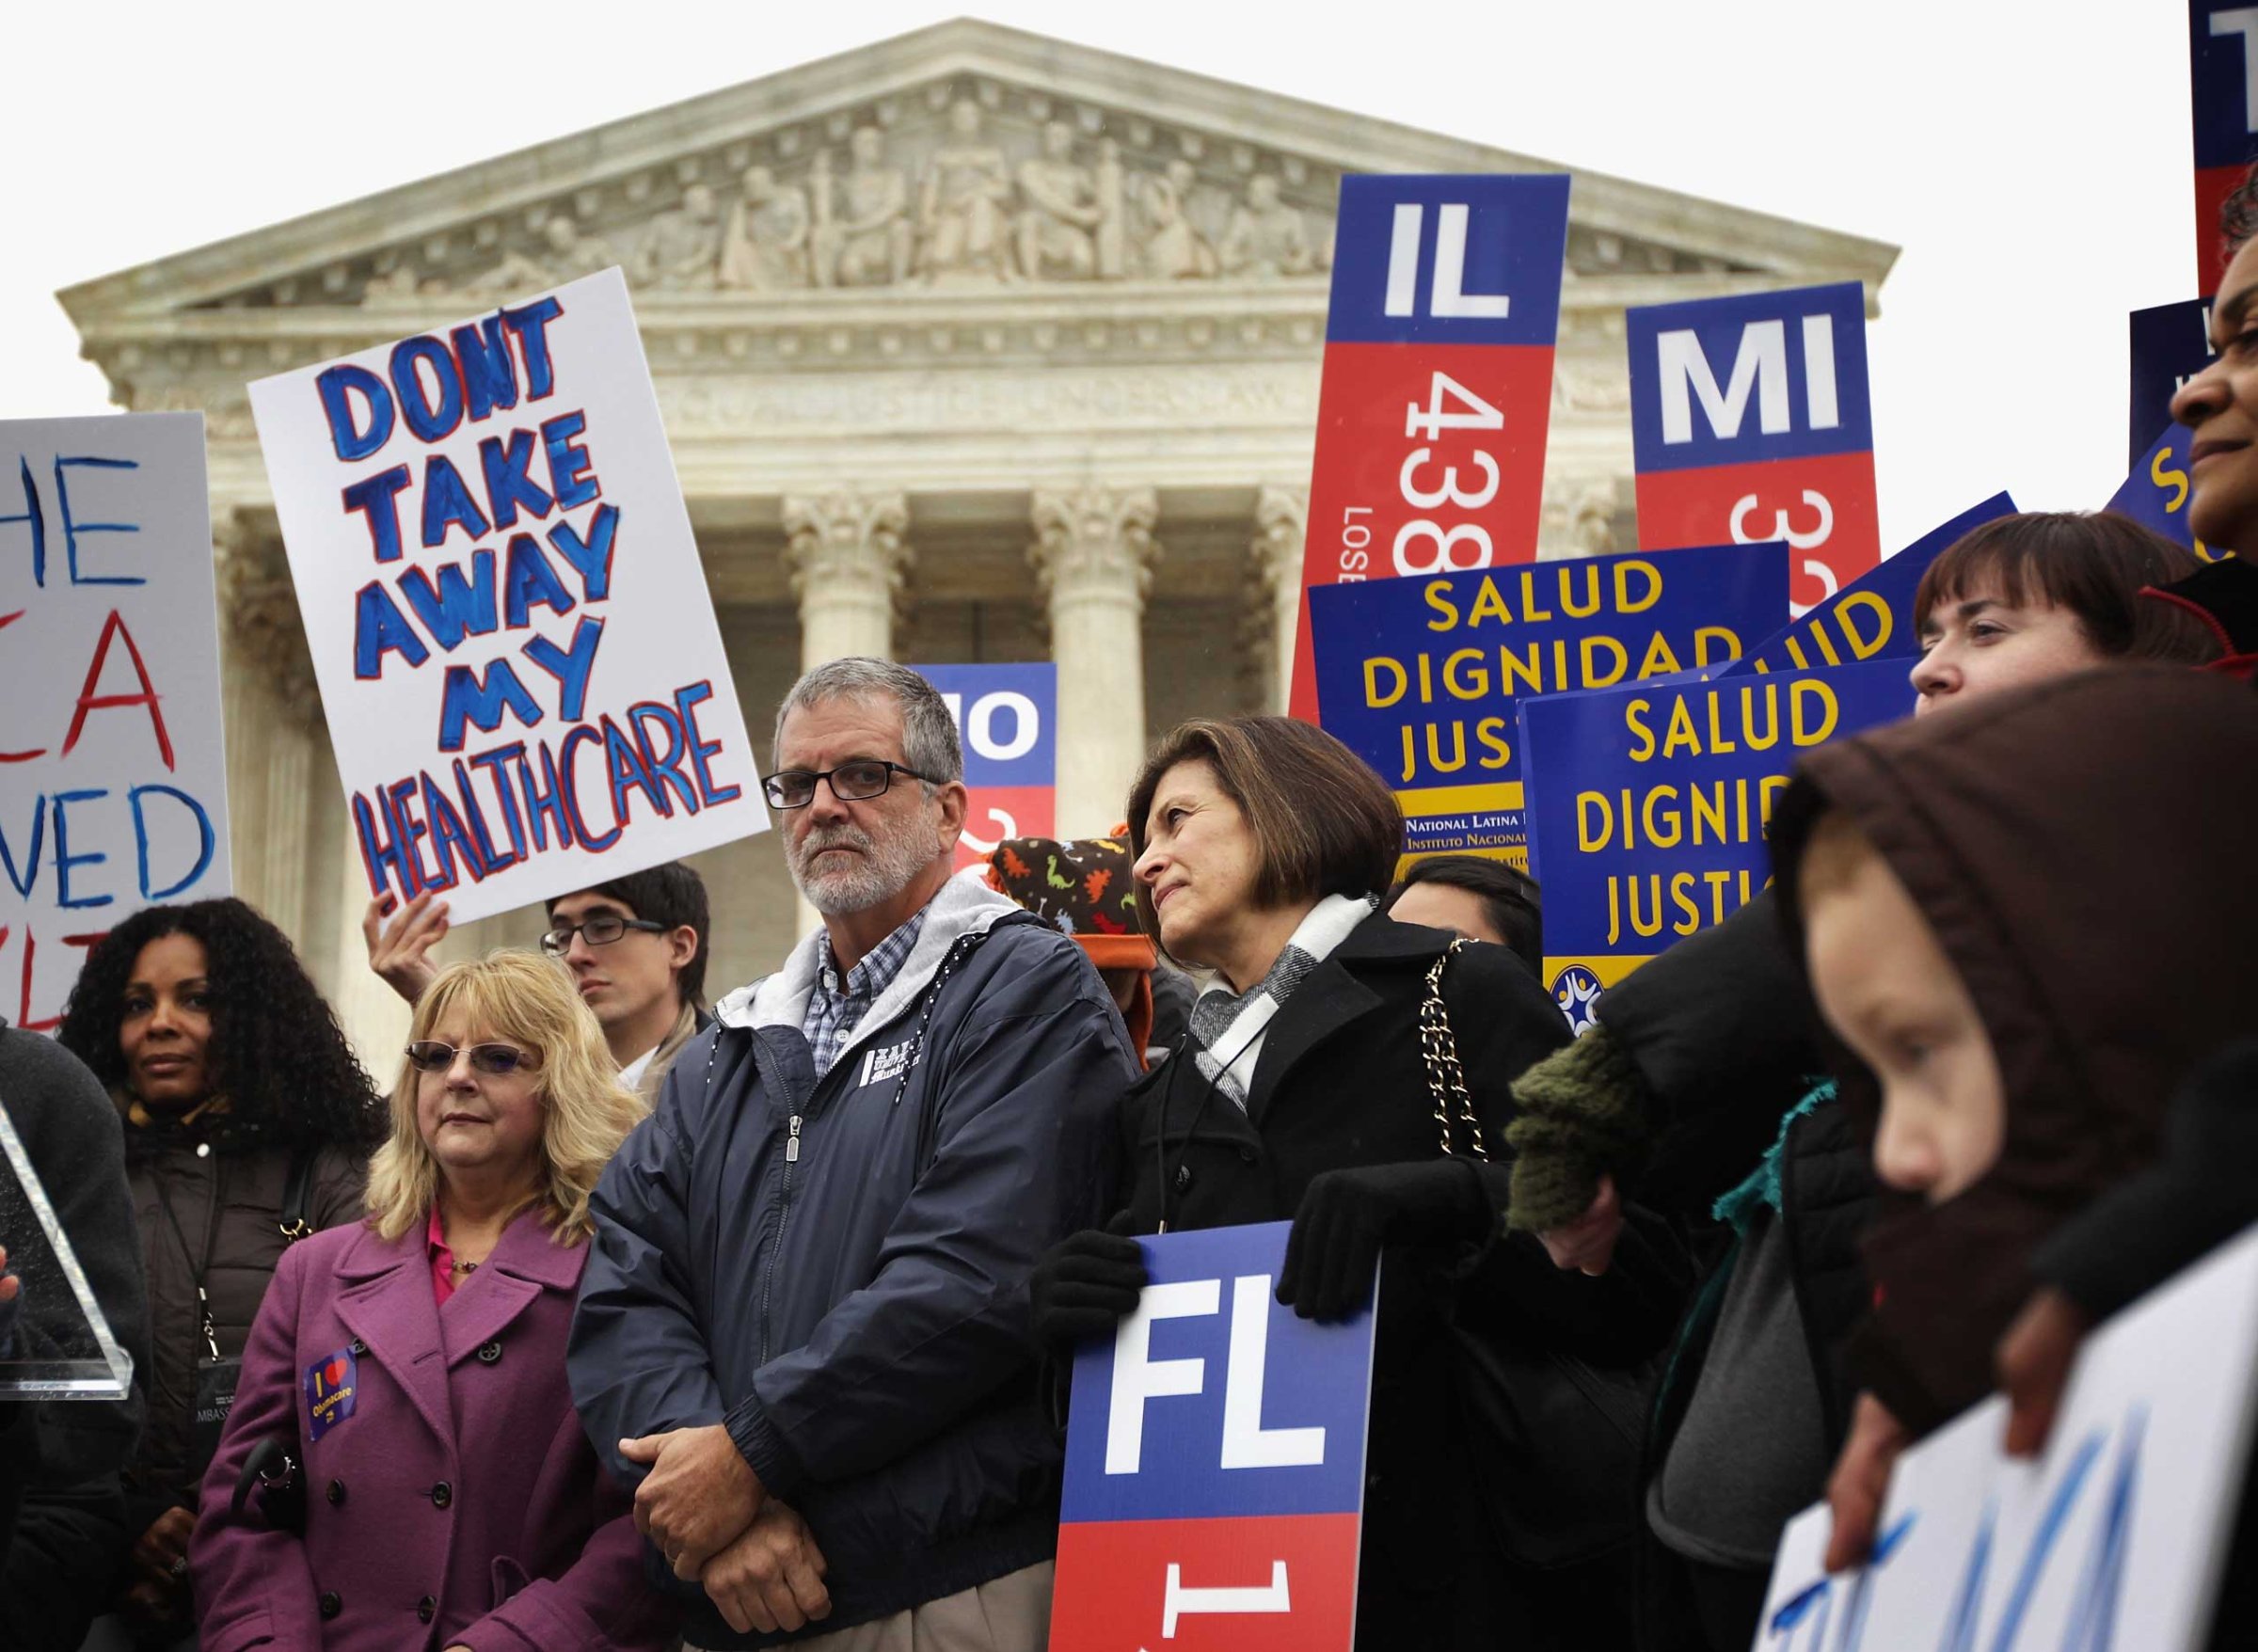 Supporters of the Affordable Care Act gather in front of the U.S Supreme Court during a rally in Washington on March 4, 2015.